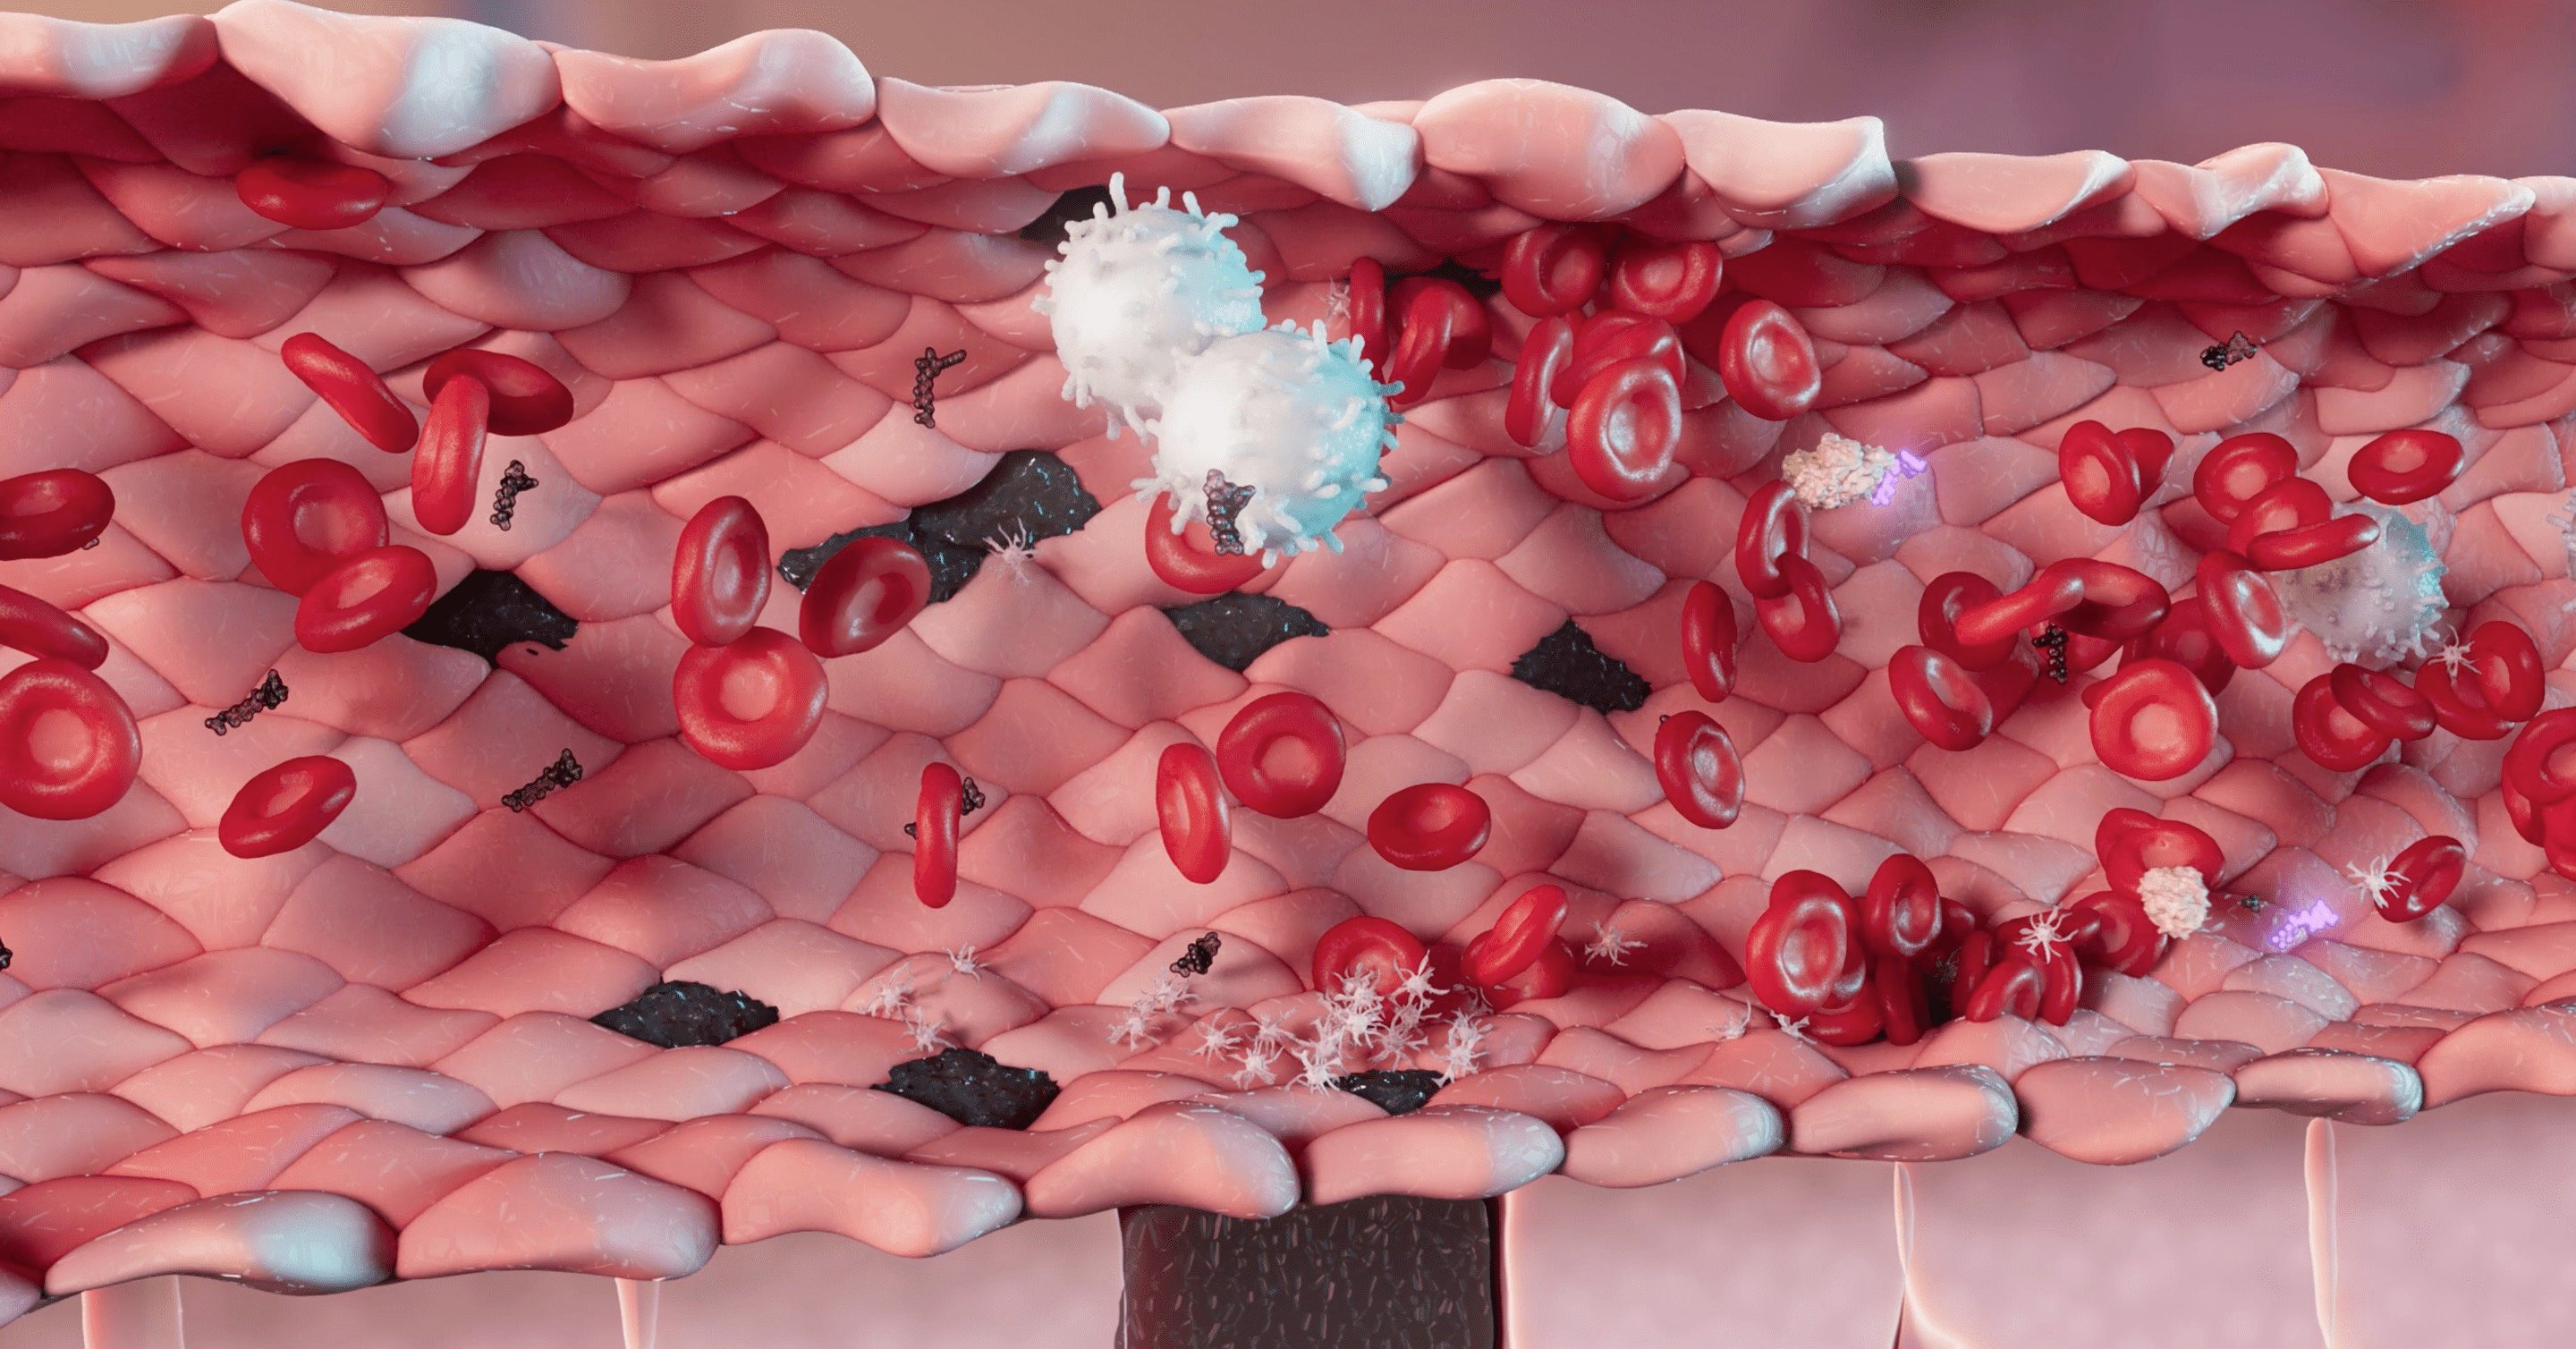 This image shows a 3D reconstruction of a blood vessel with red and white blood cells, platelets and damps and pamps 